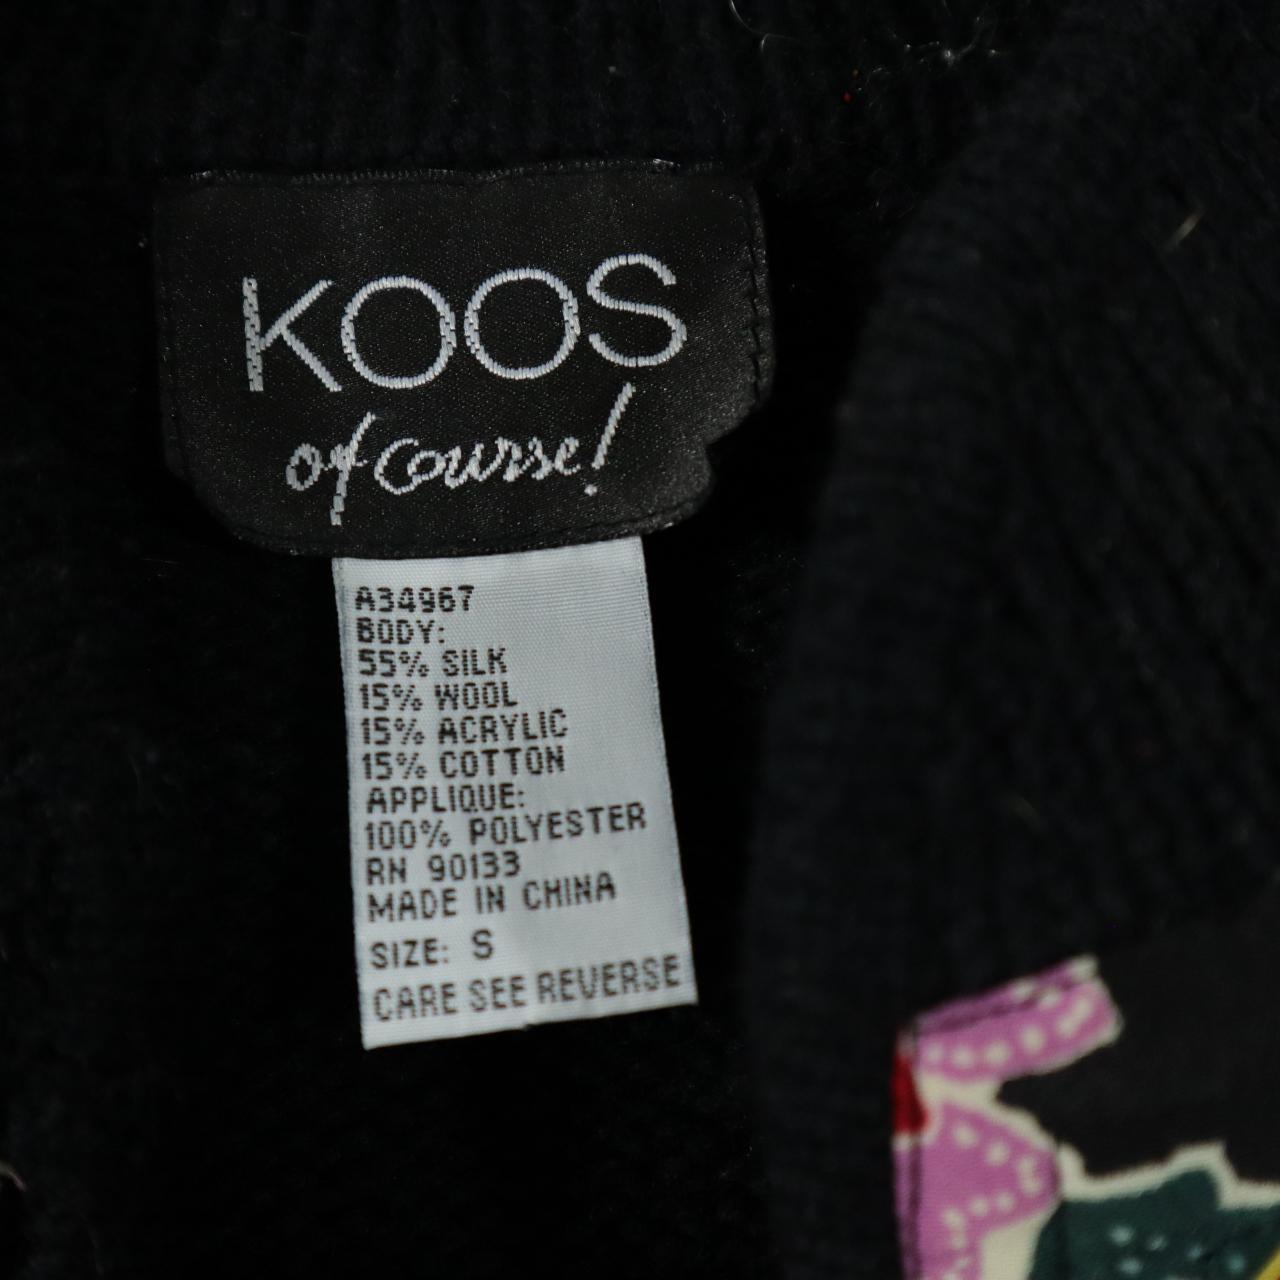 Product Image 4 - Vintage Cardigan Sweater

In good Condition.
Size